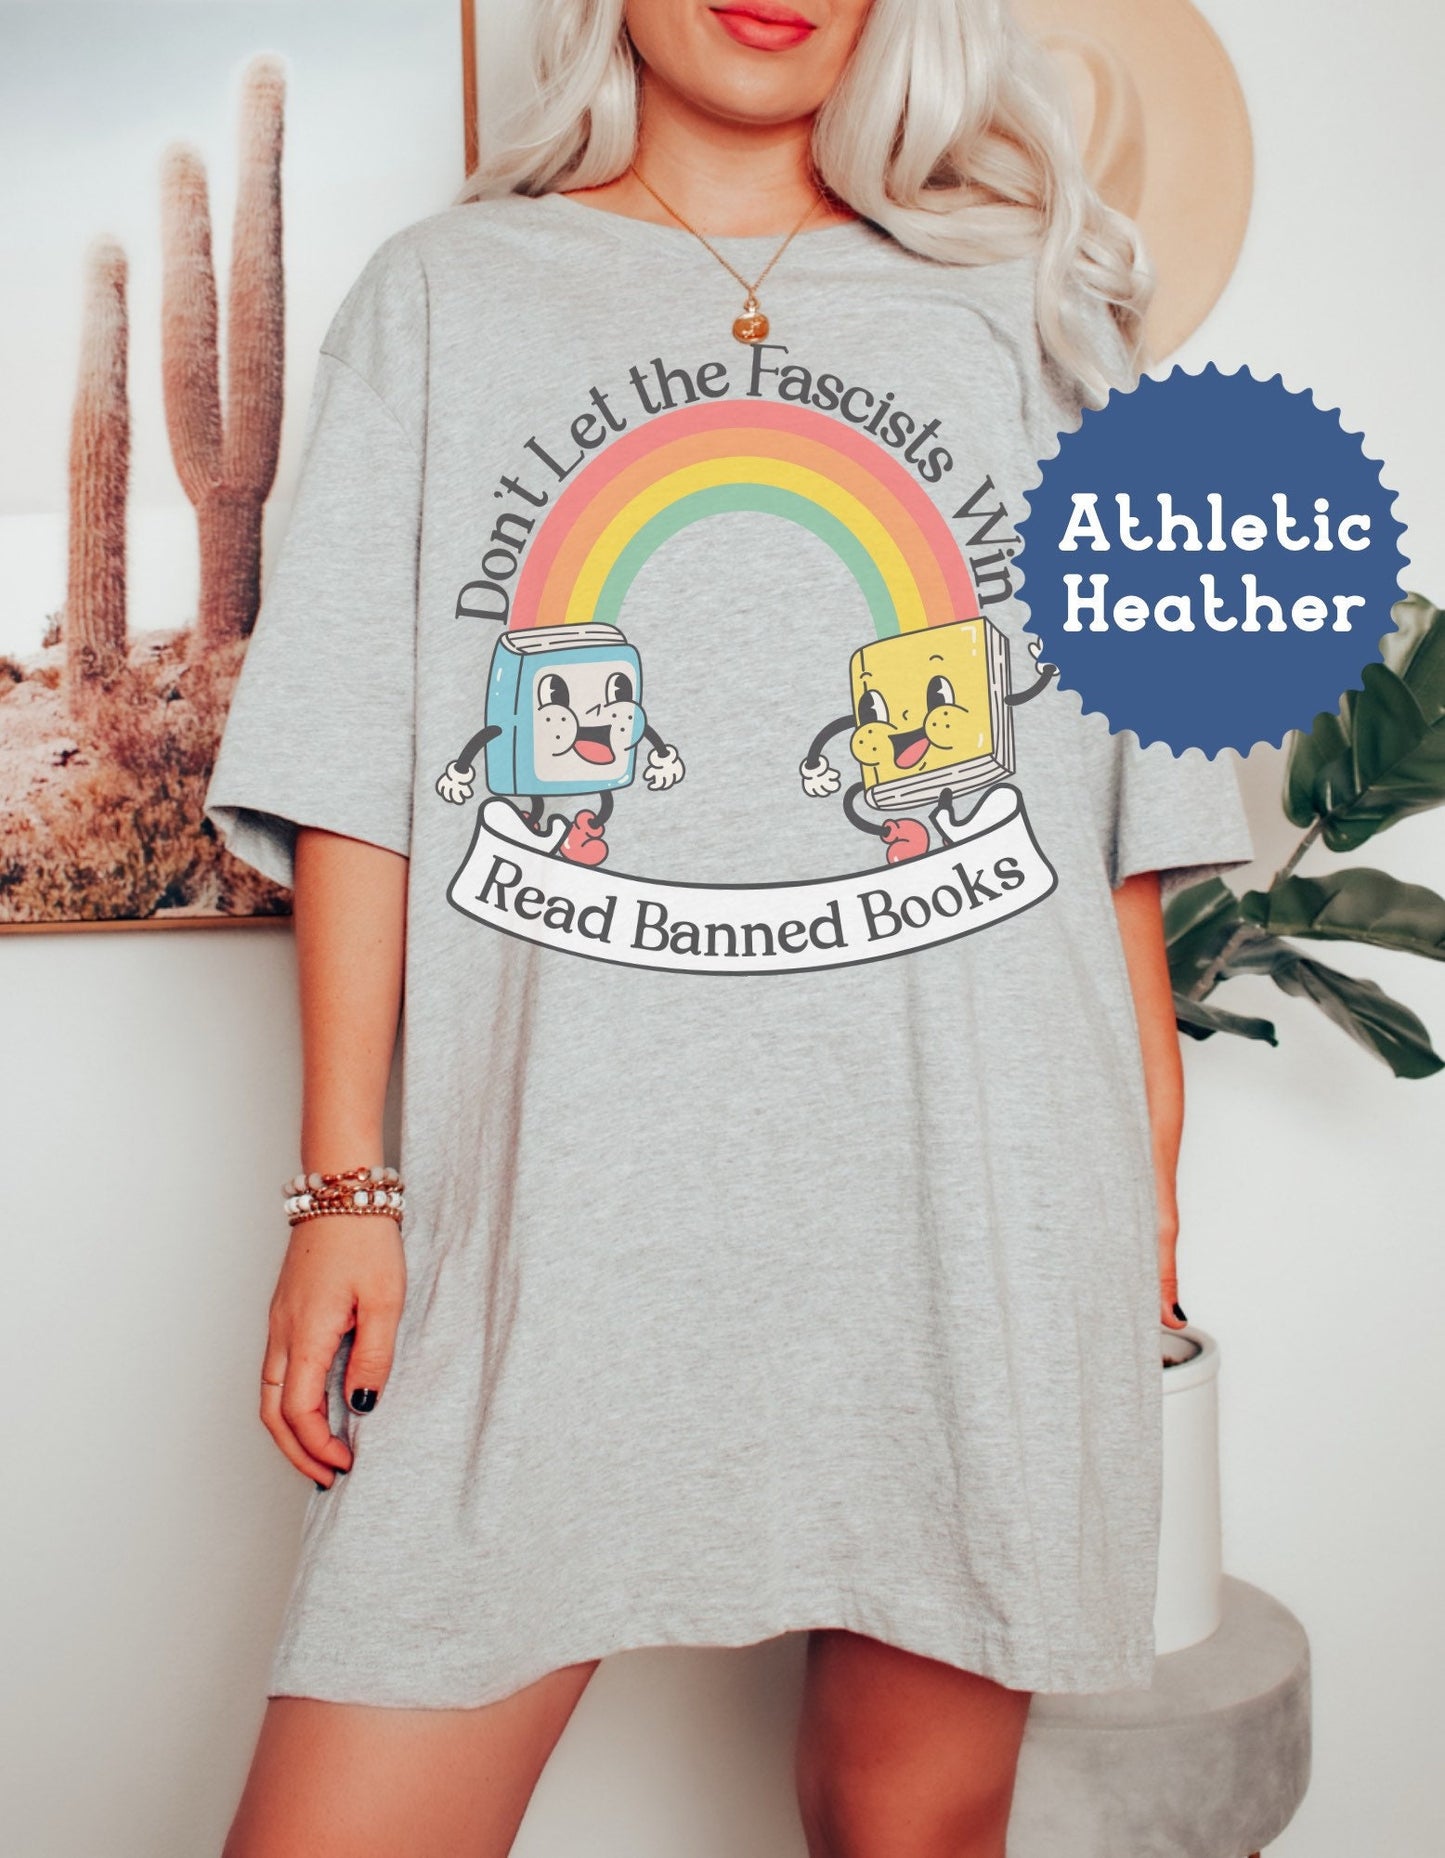 Read Banned Book Tee